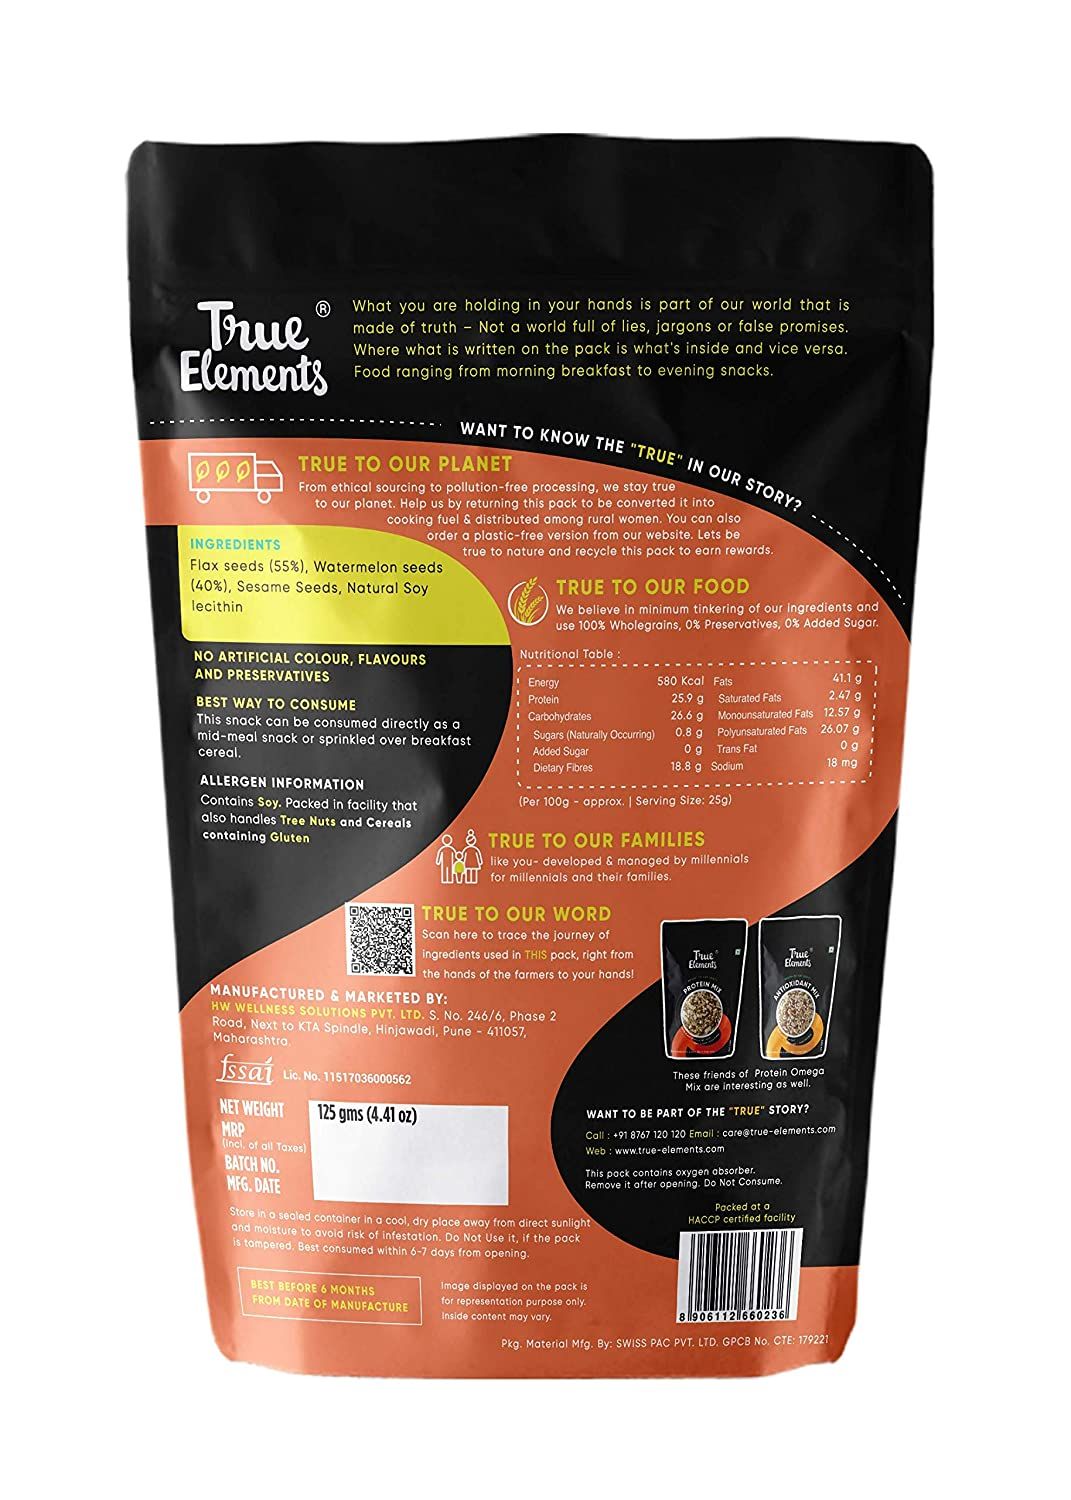 True Elements Protein Omega Mix Image